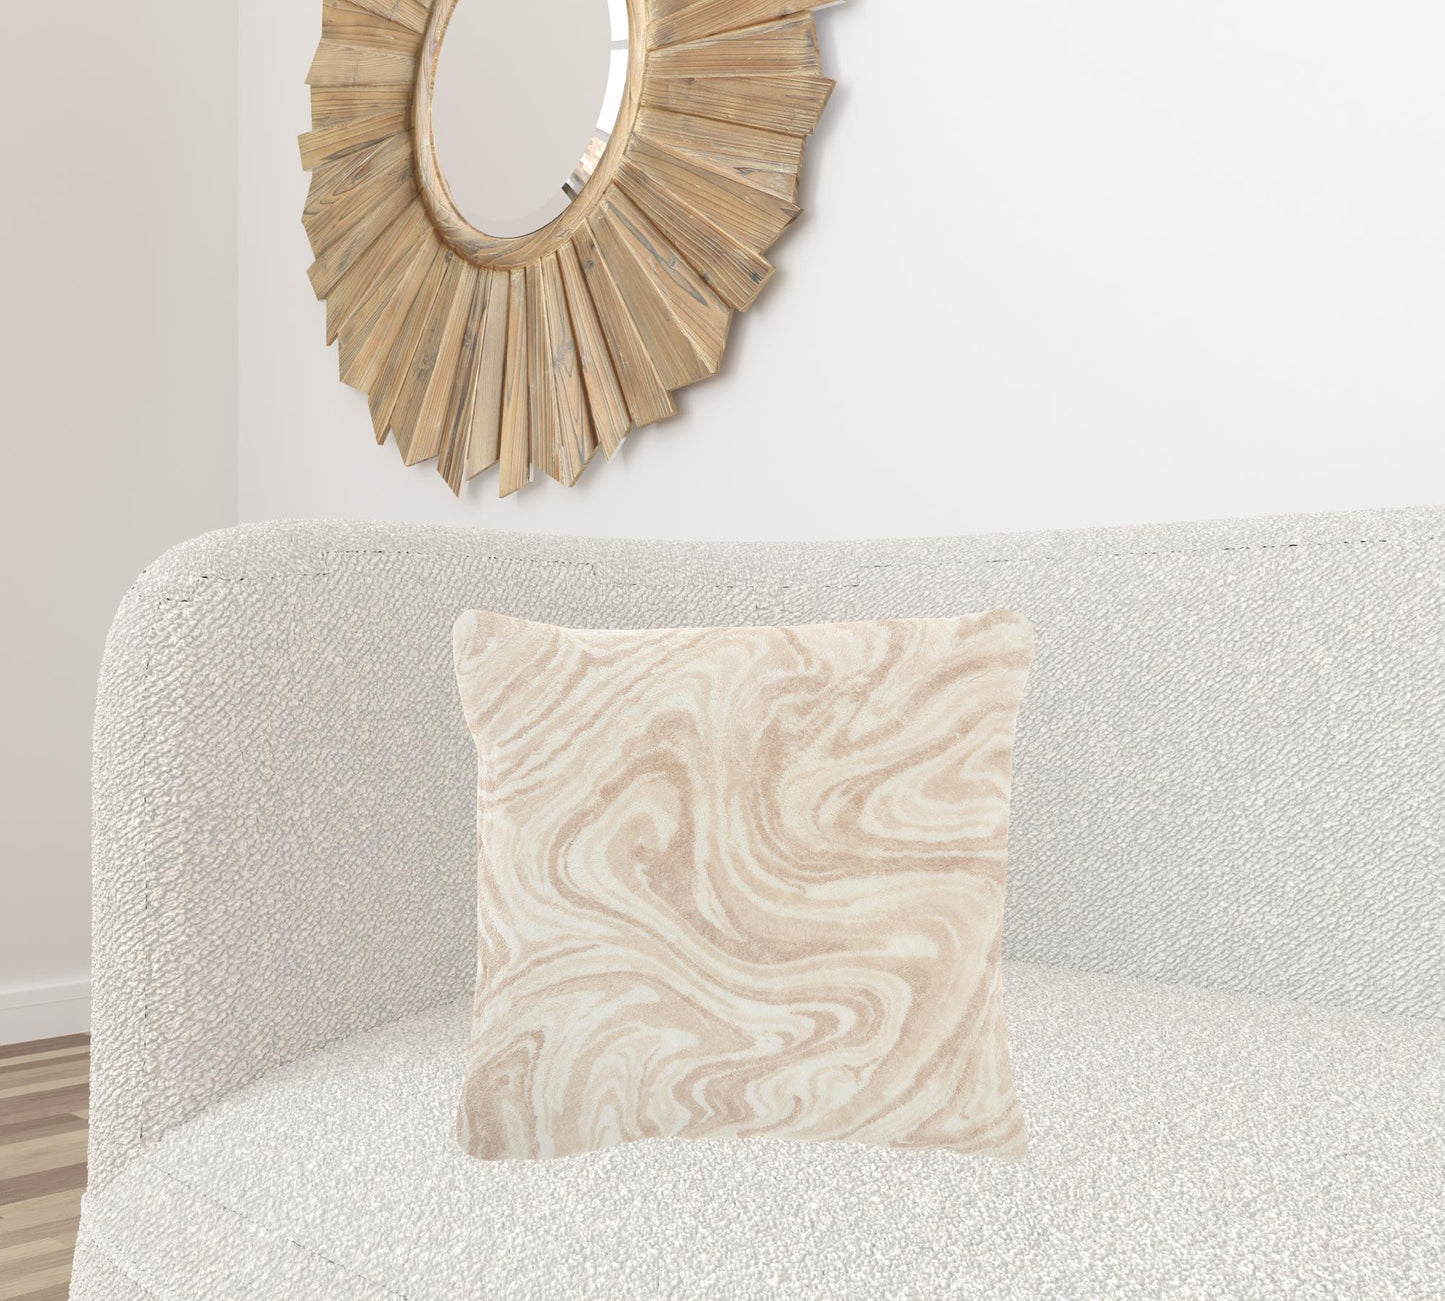 Cream Marble Patterned Throw Pillow